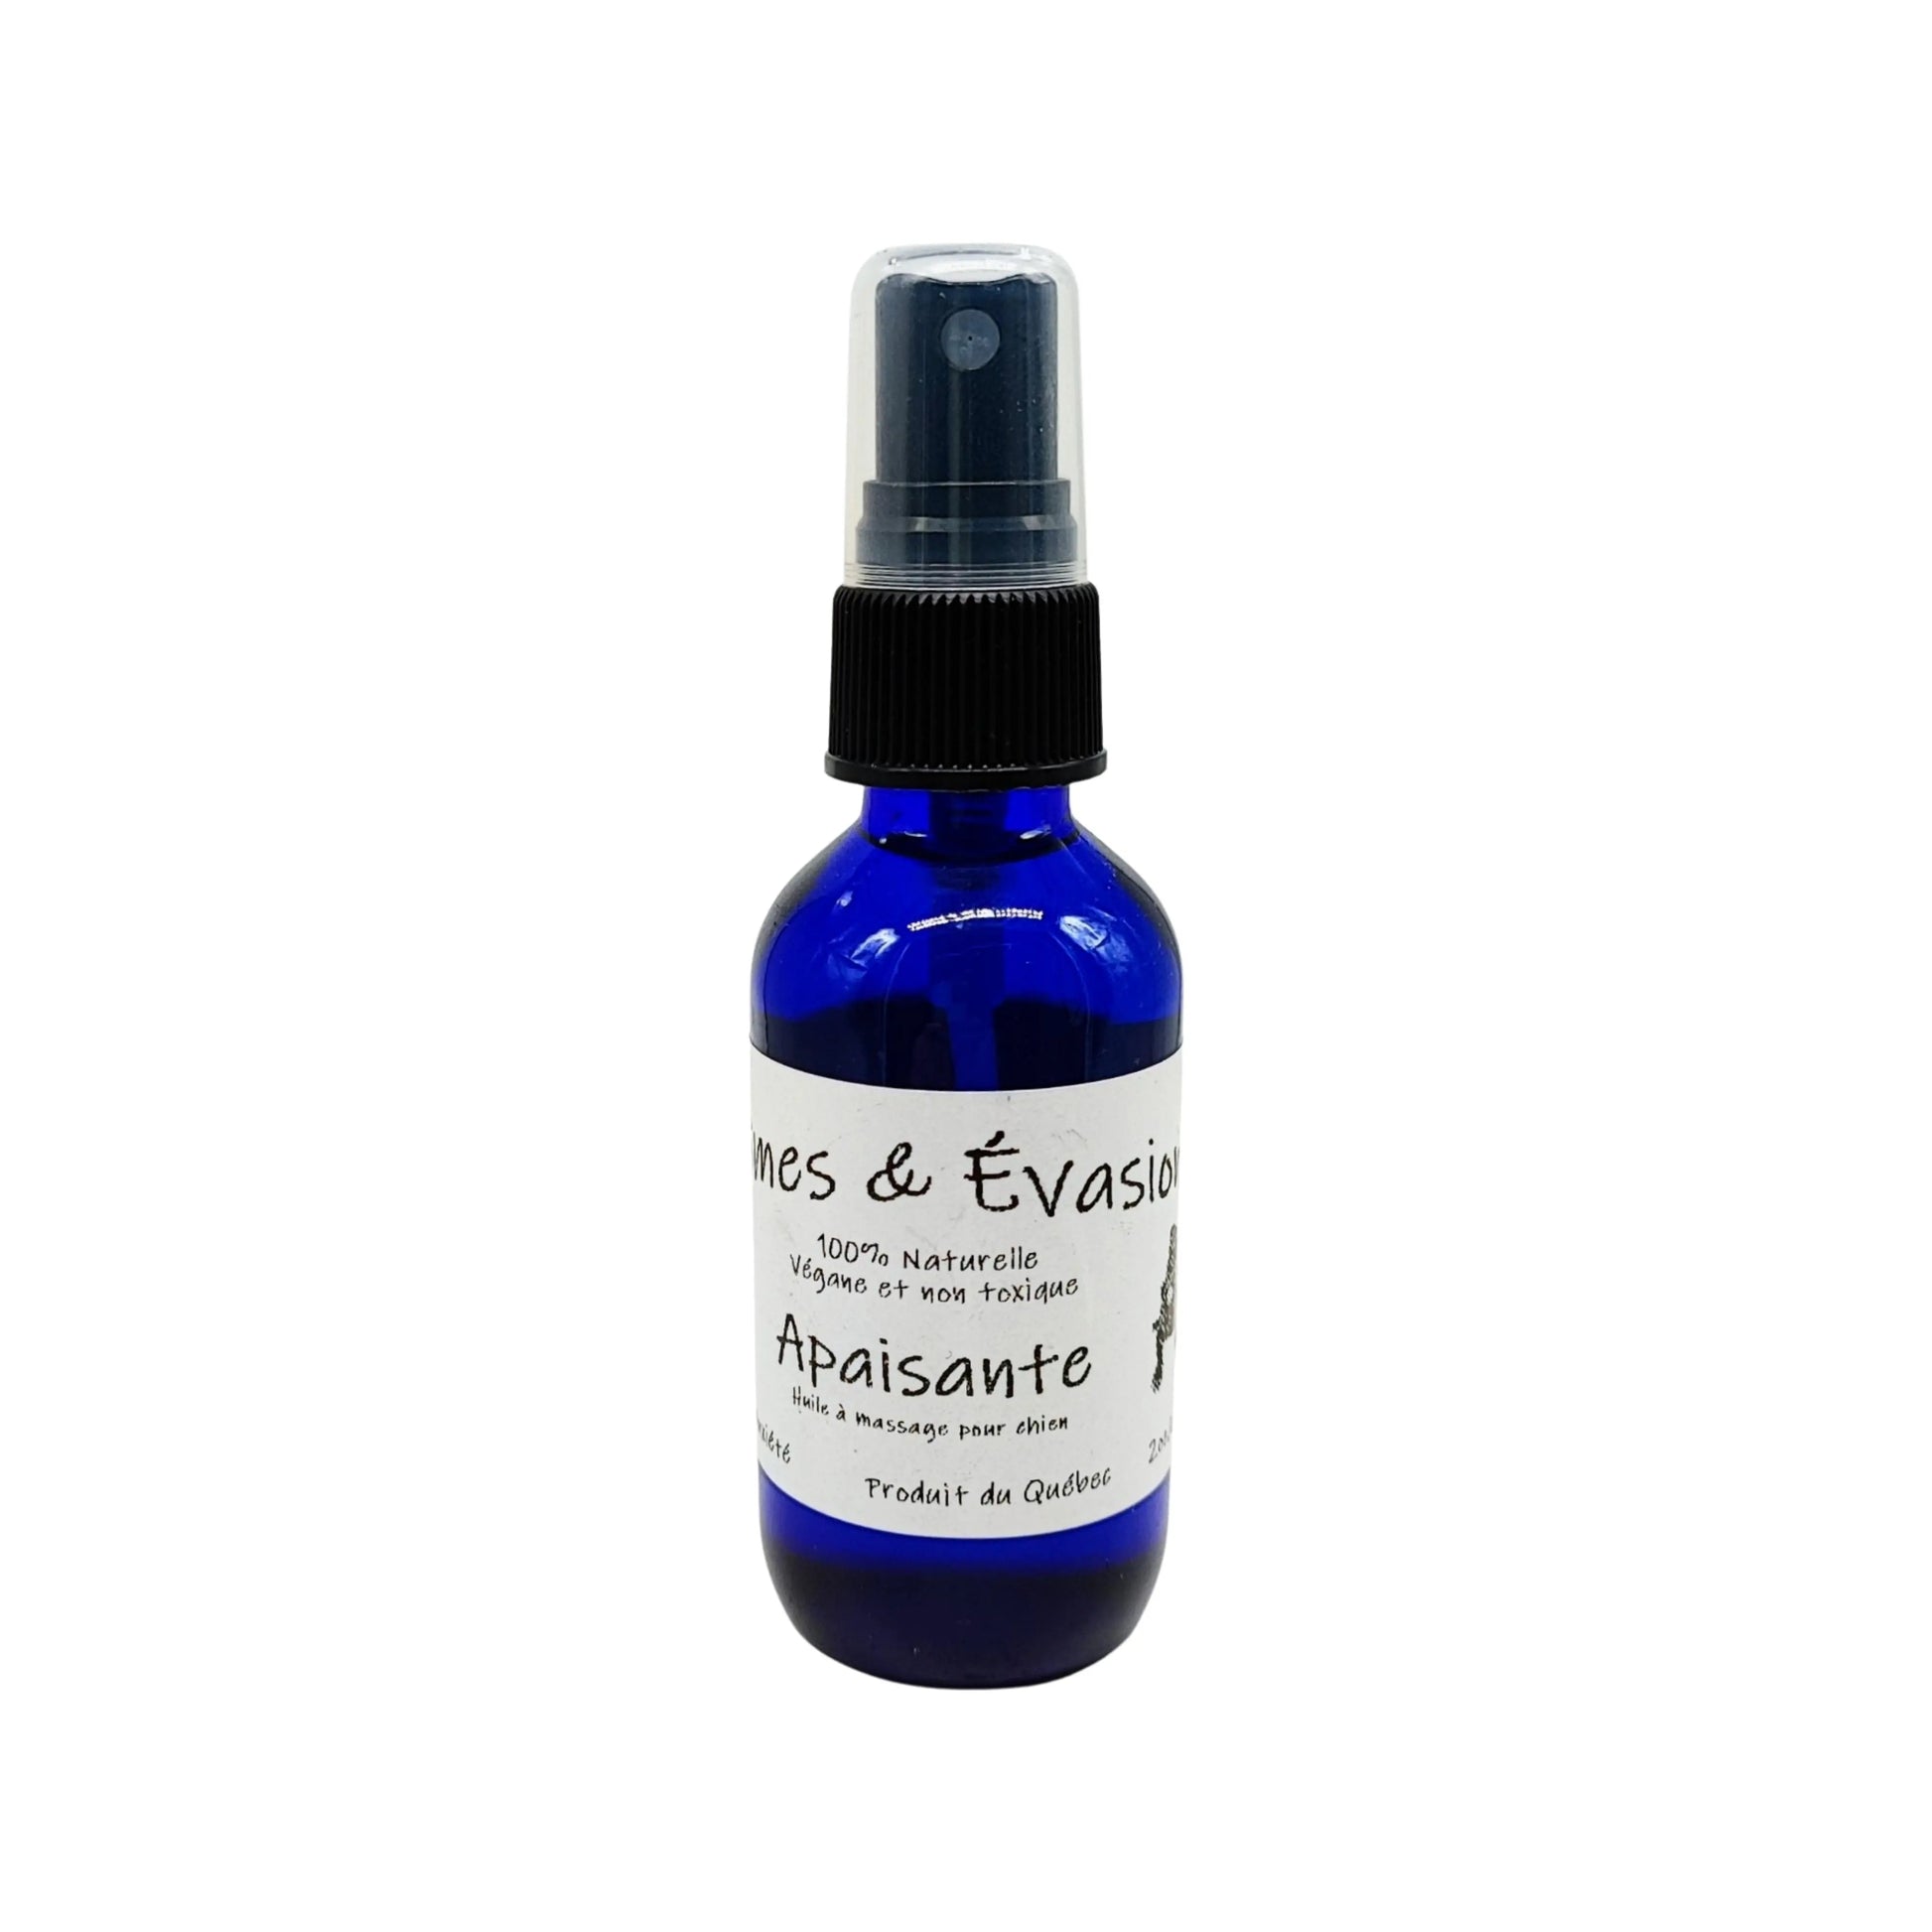 Pet Supplies -Dog -Mists -Relaxation and Anti Anxiety -60ml -Dog Product -Aromes Evasions 